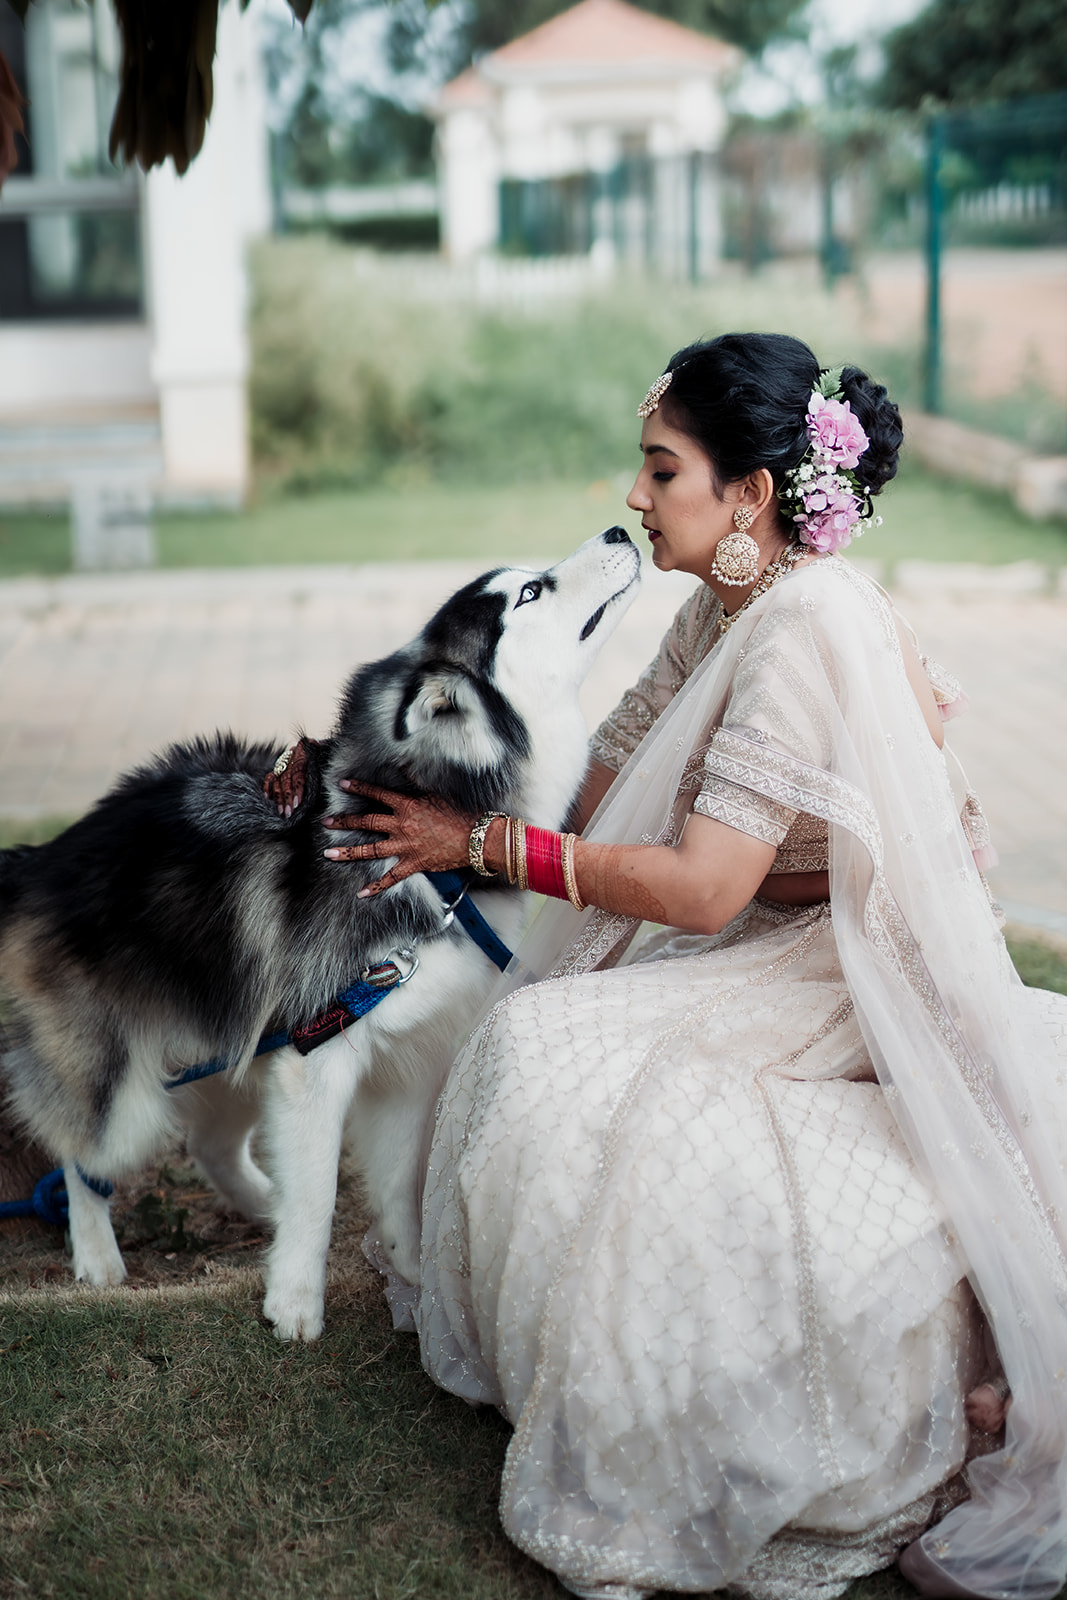 Bridal bliss: The bride in a stunning lehenga shares a joyous moment with her adorable pet